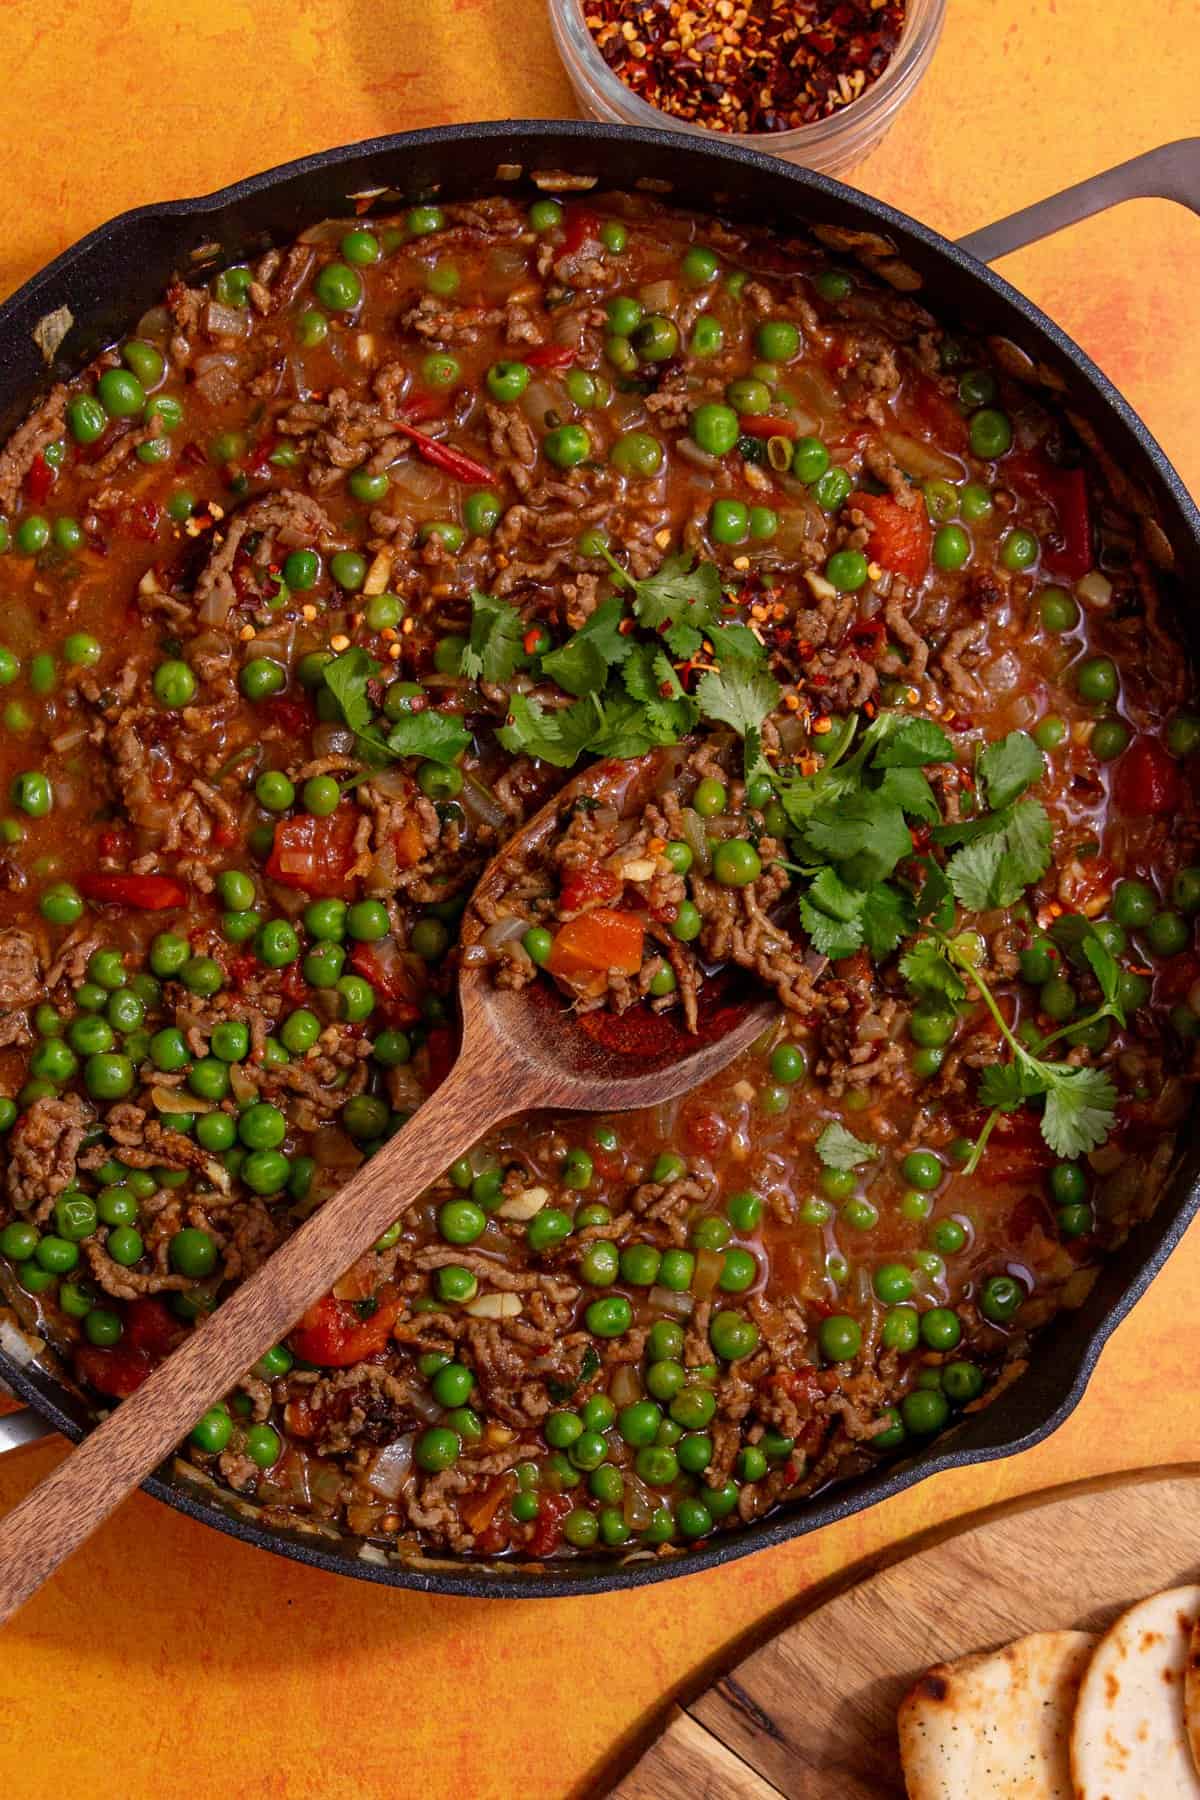 Mince curry with peas topped with fresh coriander with a wooden spoon in the pan and a small bowl of chillies behind the pan.